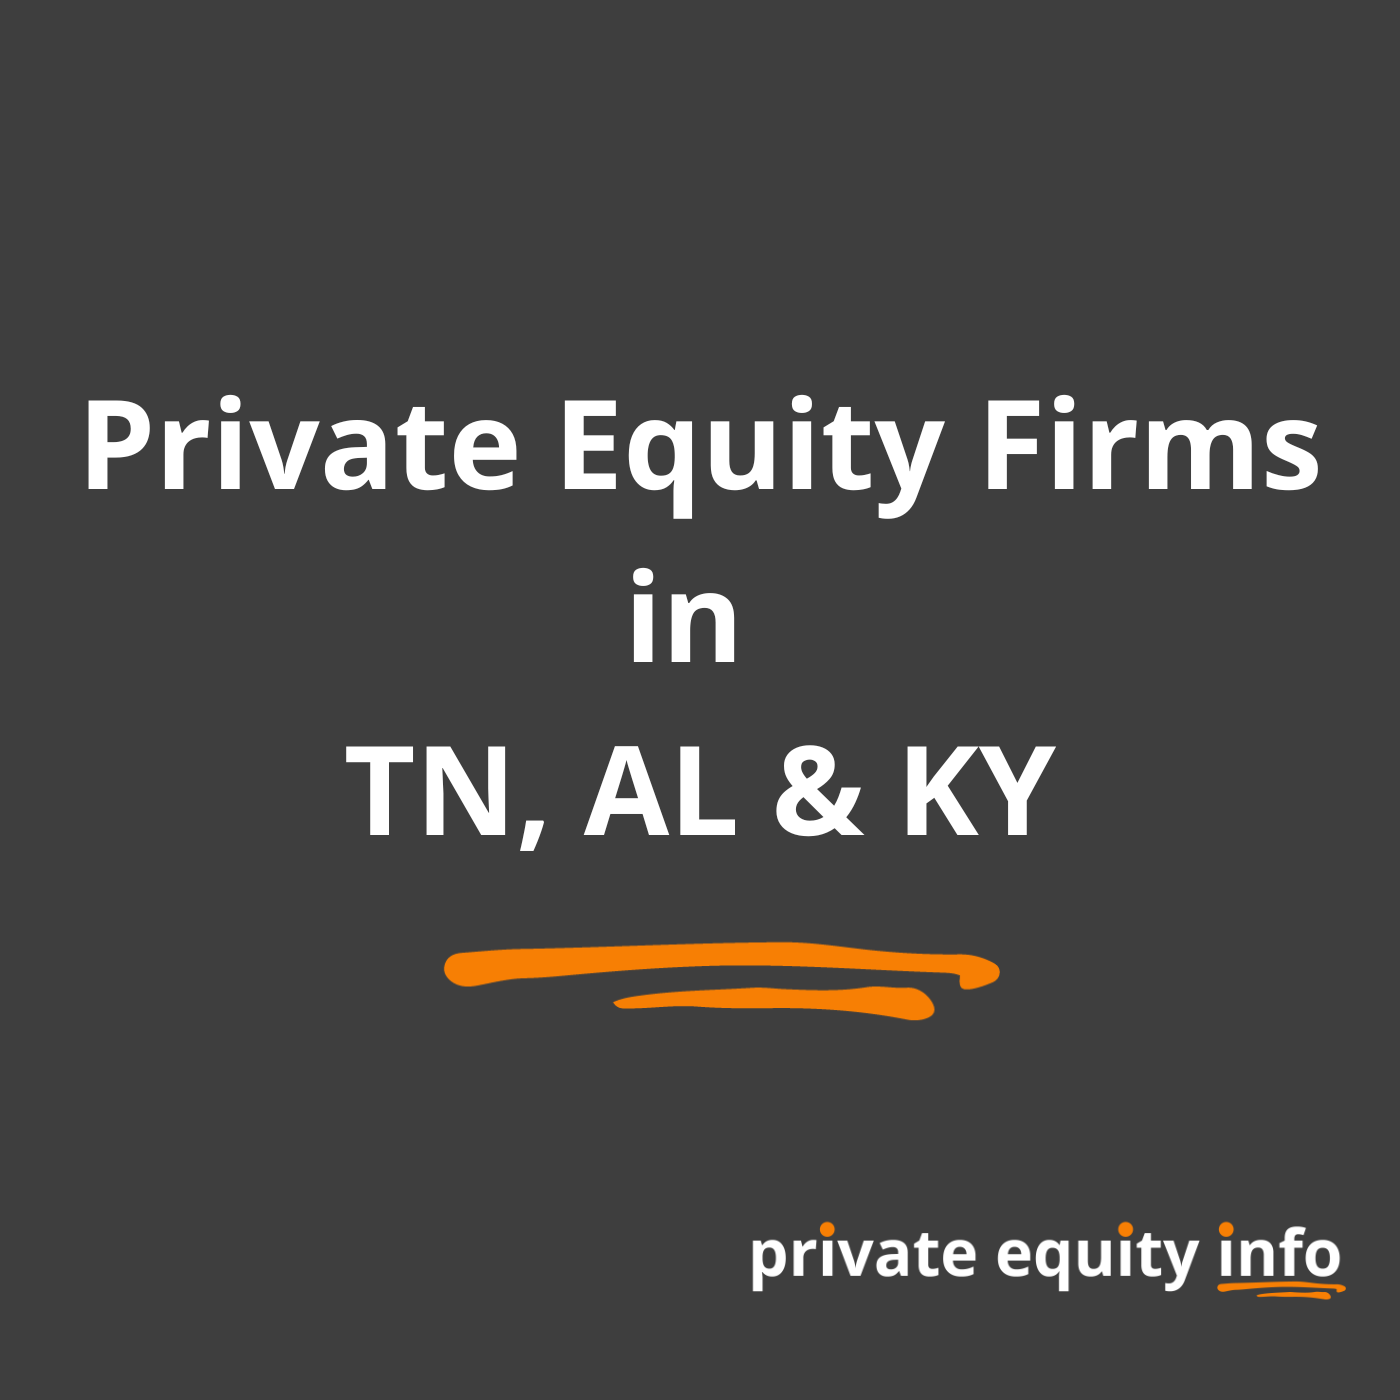 Private Equity Firms in Tennessee, Alabama and Kentucky